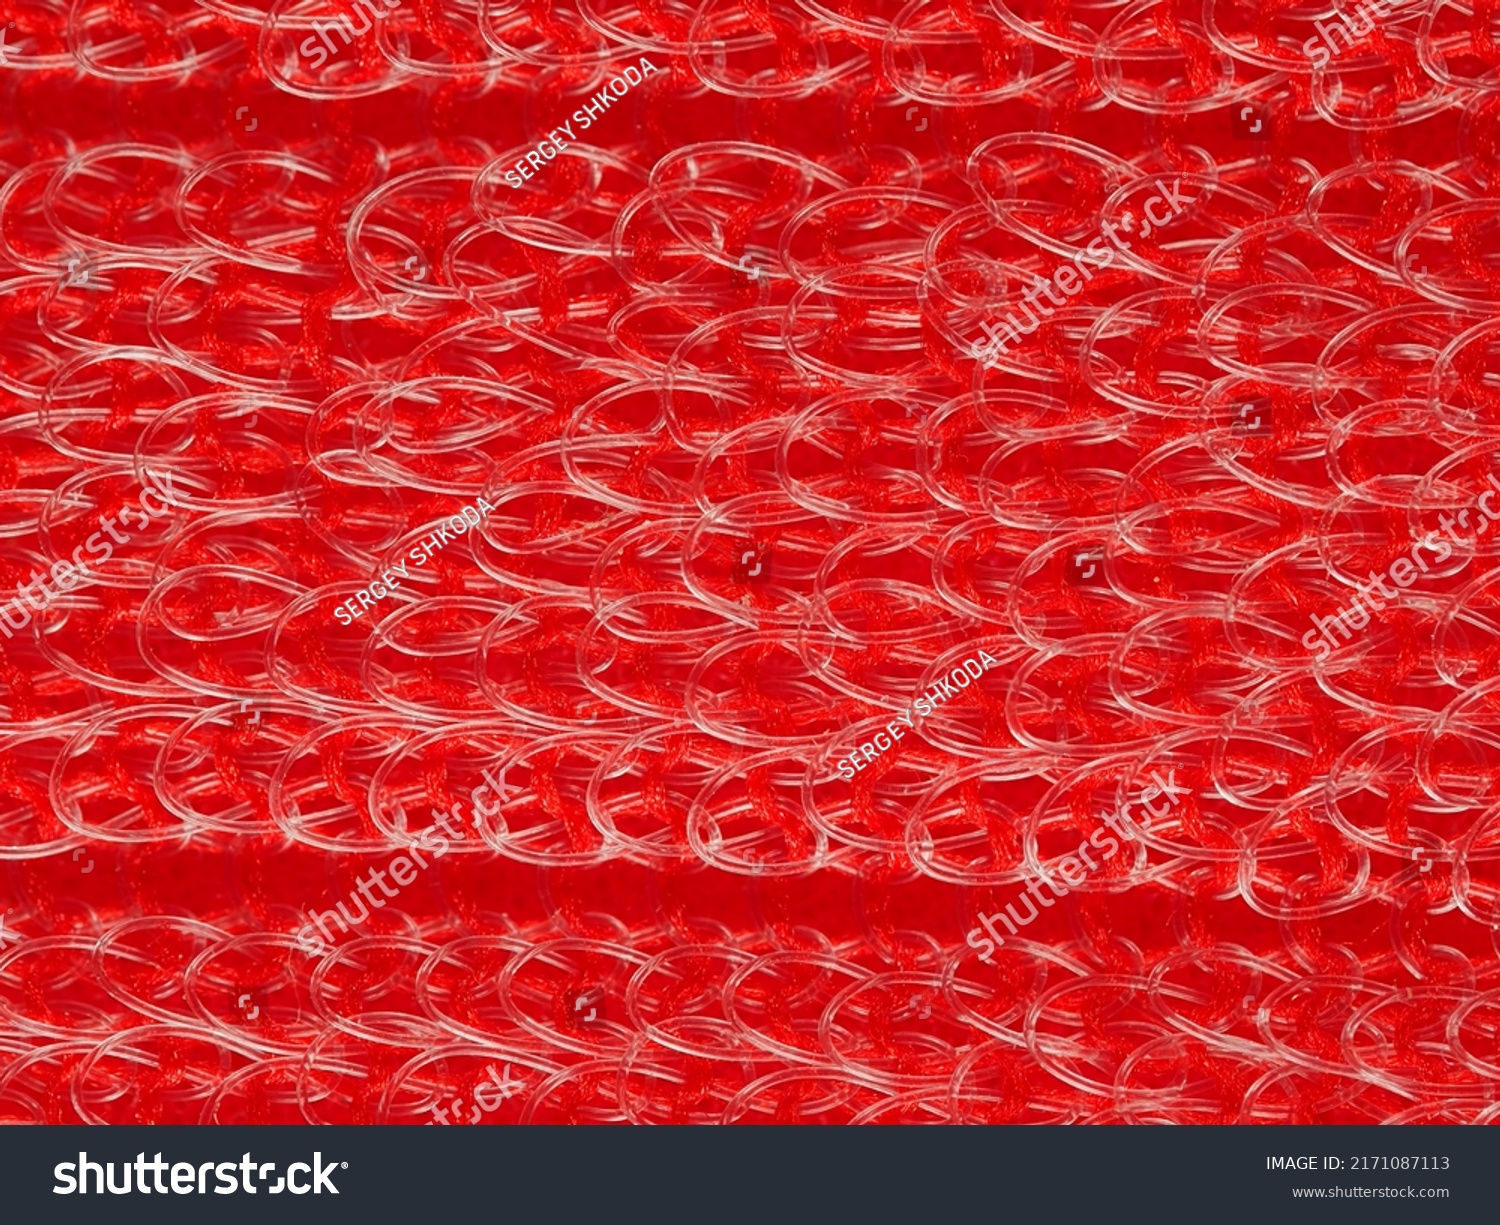 close up, background, texture, large horizontal banner. heterogeneous surface structure bright saturated red sponge for washing dishes, kitchen, bath. full depth of field. high resolution photo #2171087113